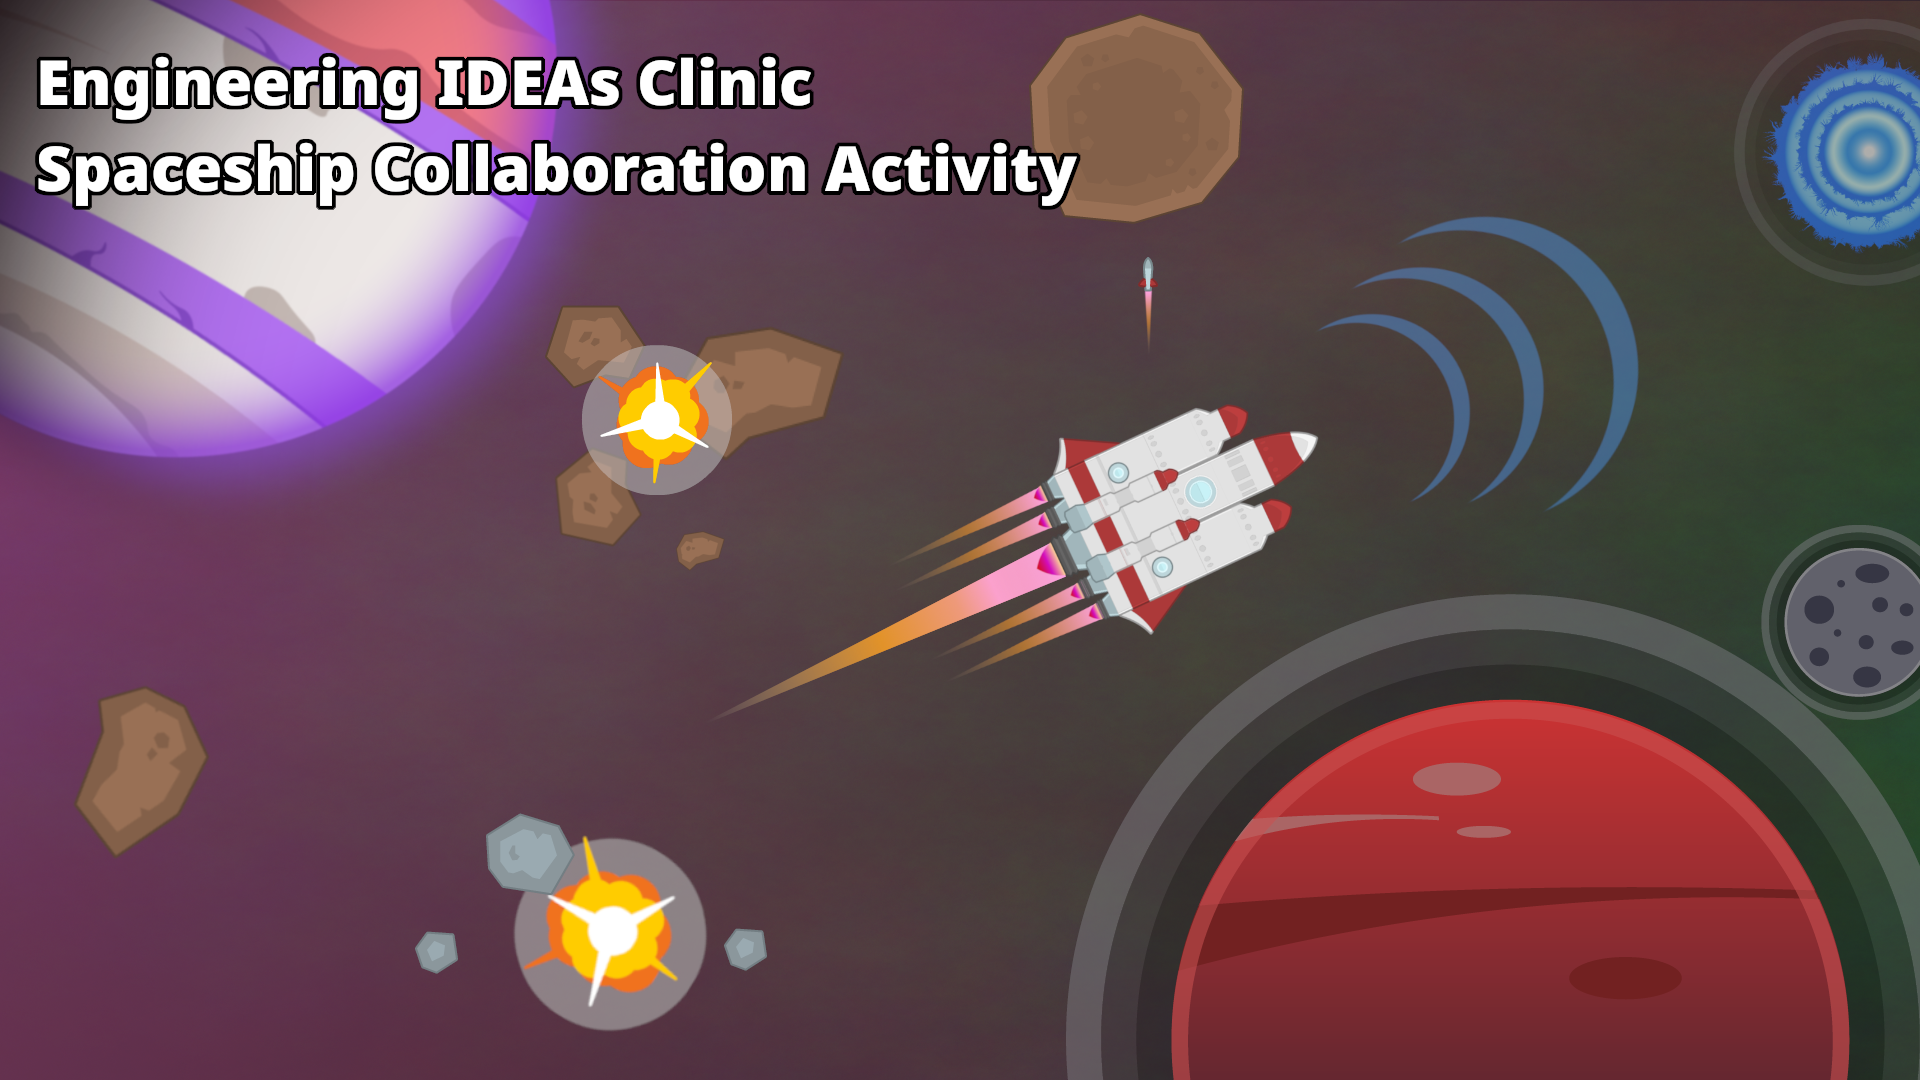 Engineering IDEAs Clinic graphic